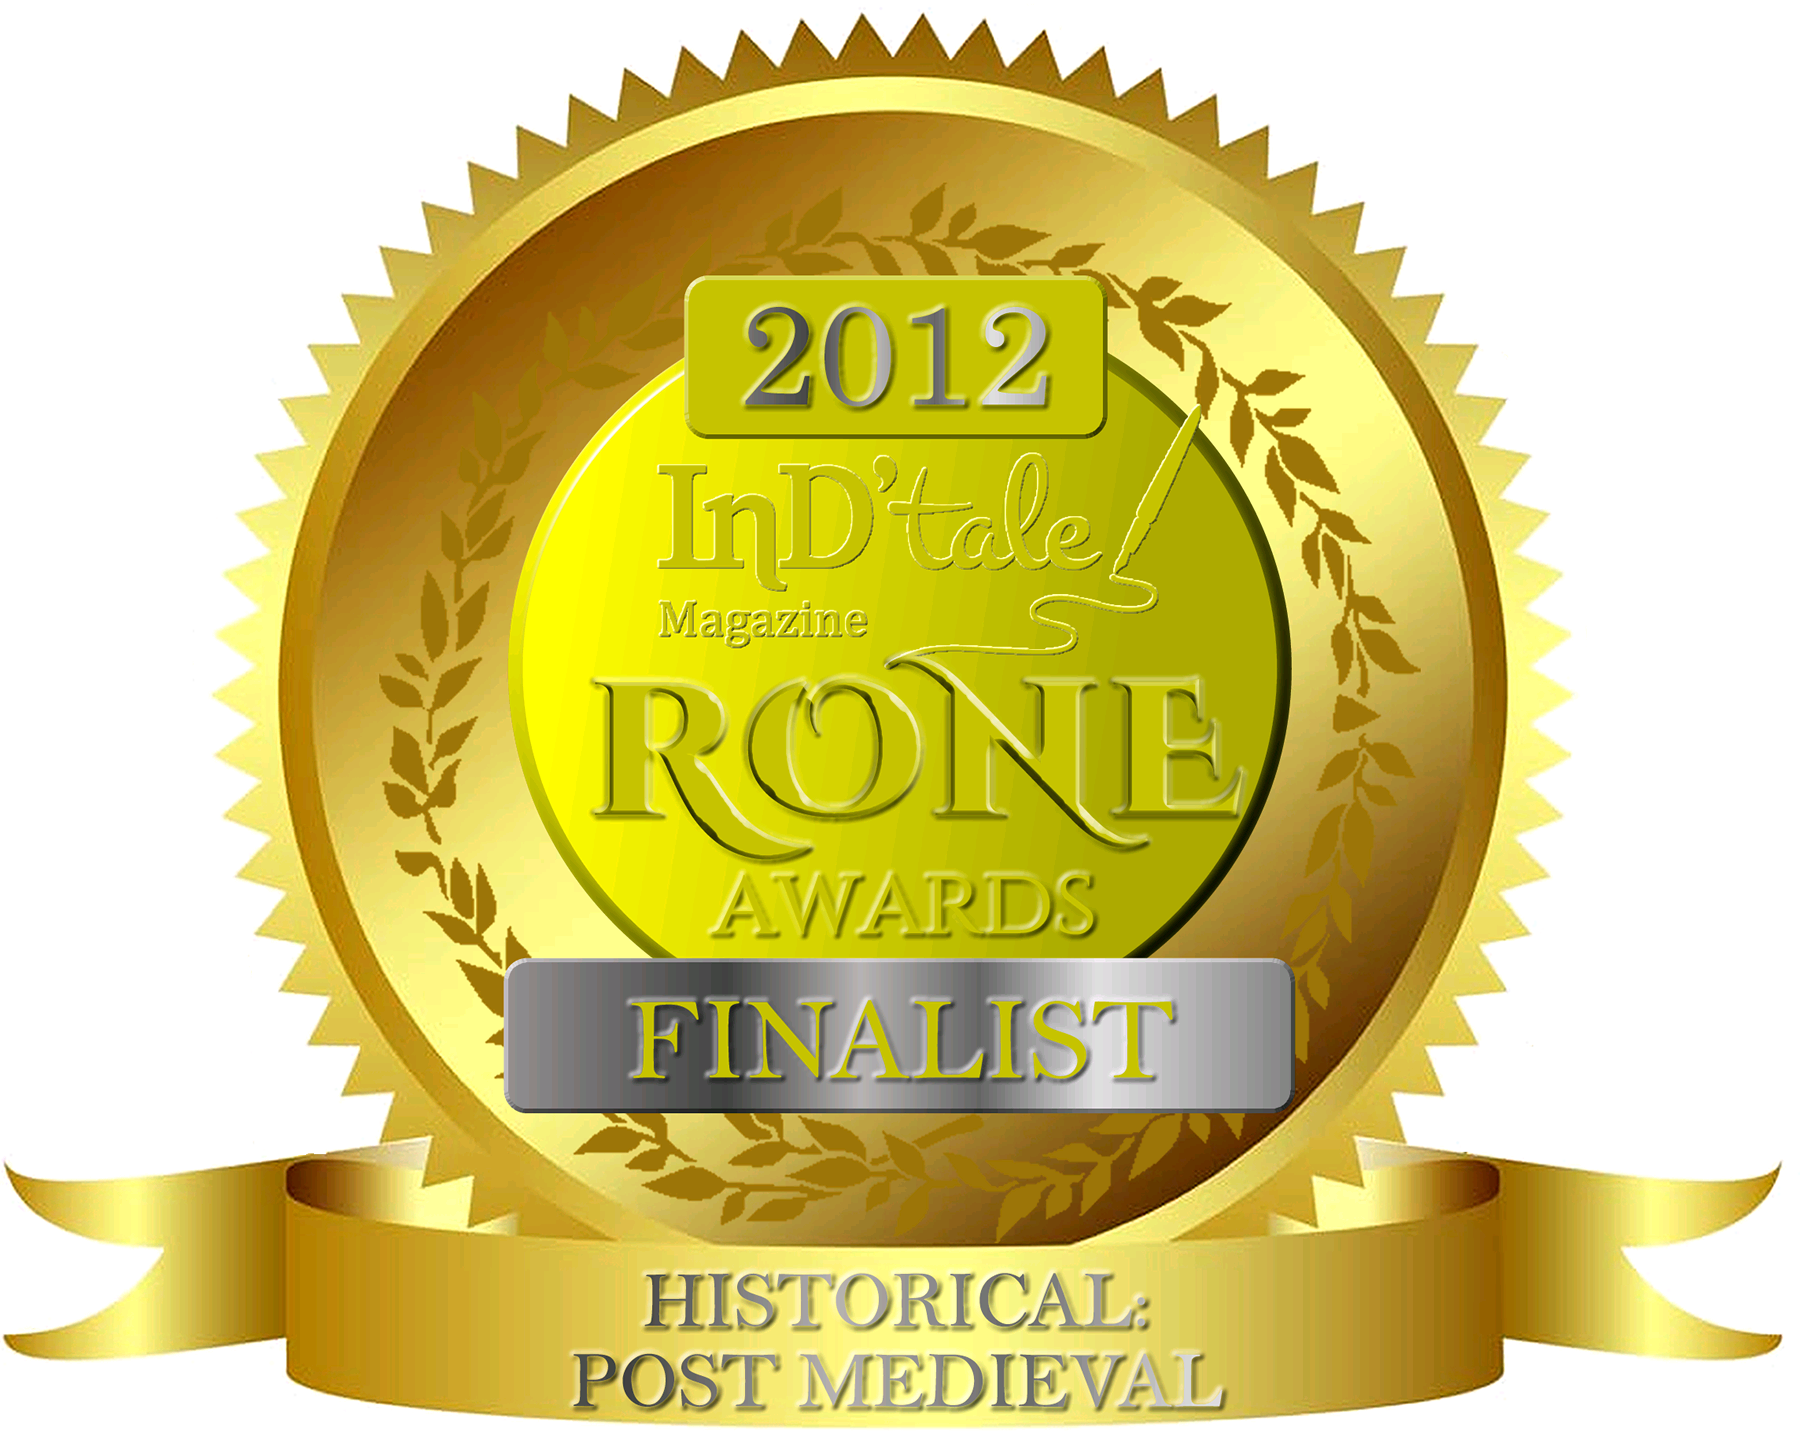 2012_rone_finalisthistorical-post-medieval